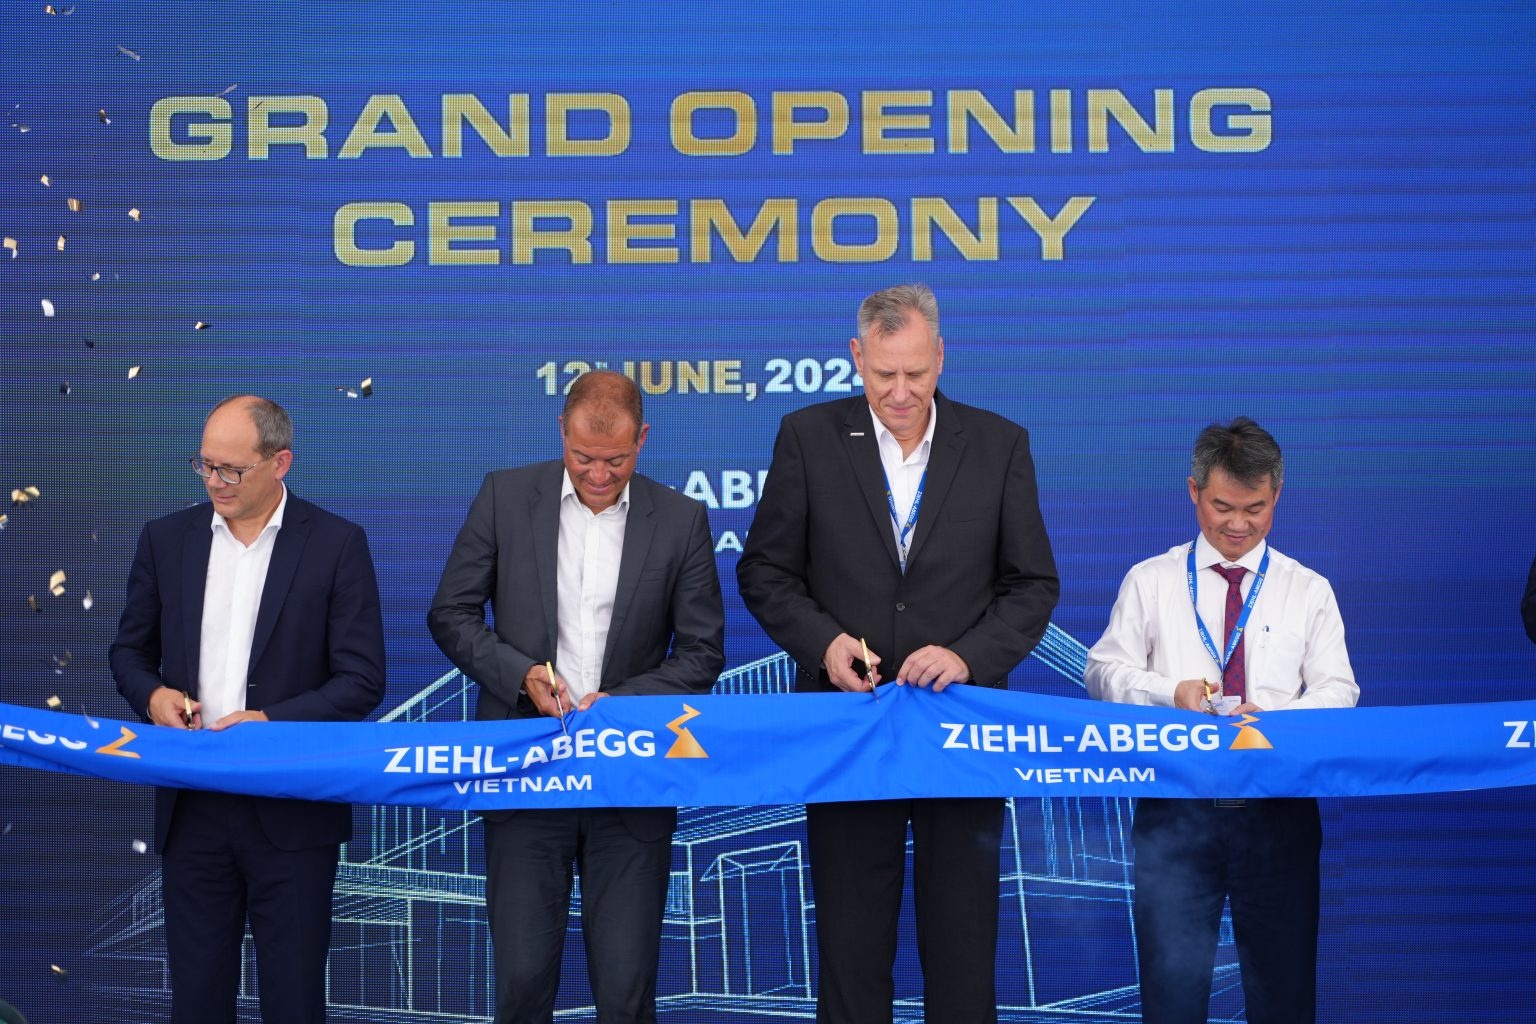 Germany's Ziehl-Abegg Vietnam inaugurates new production facility in Dong Nai